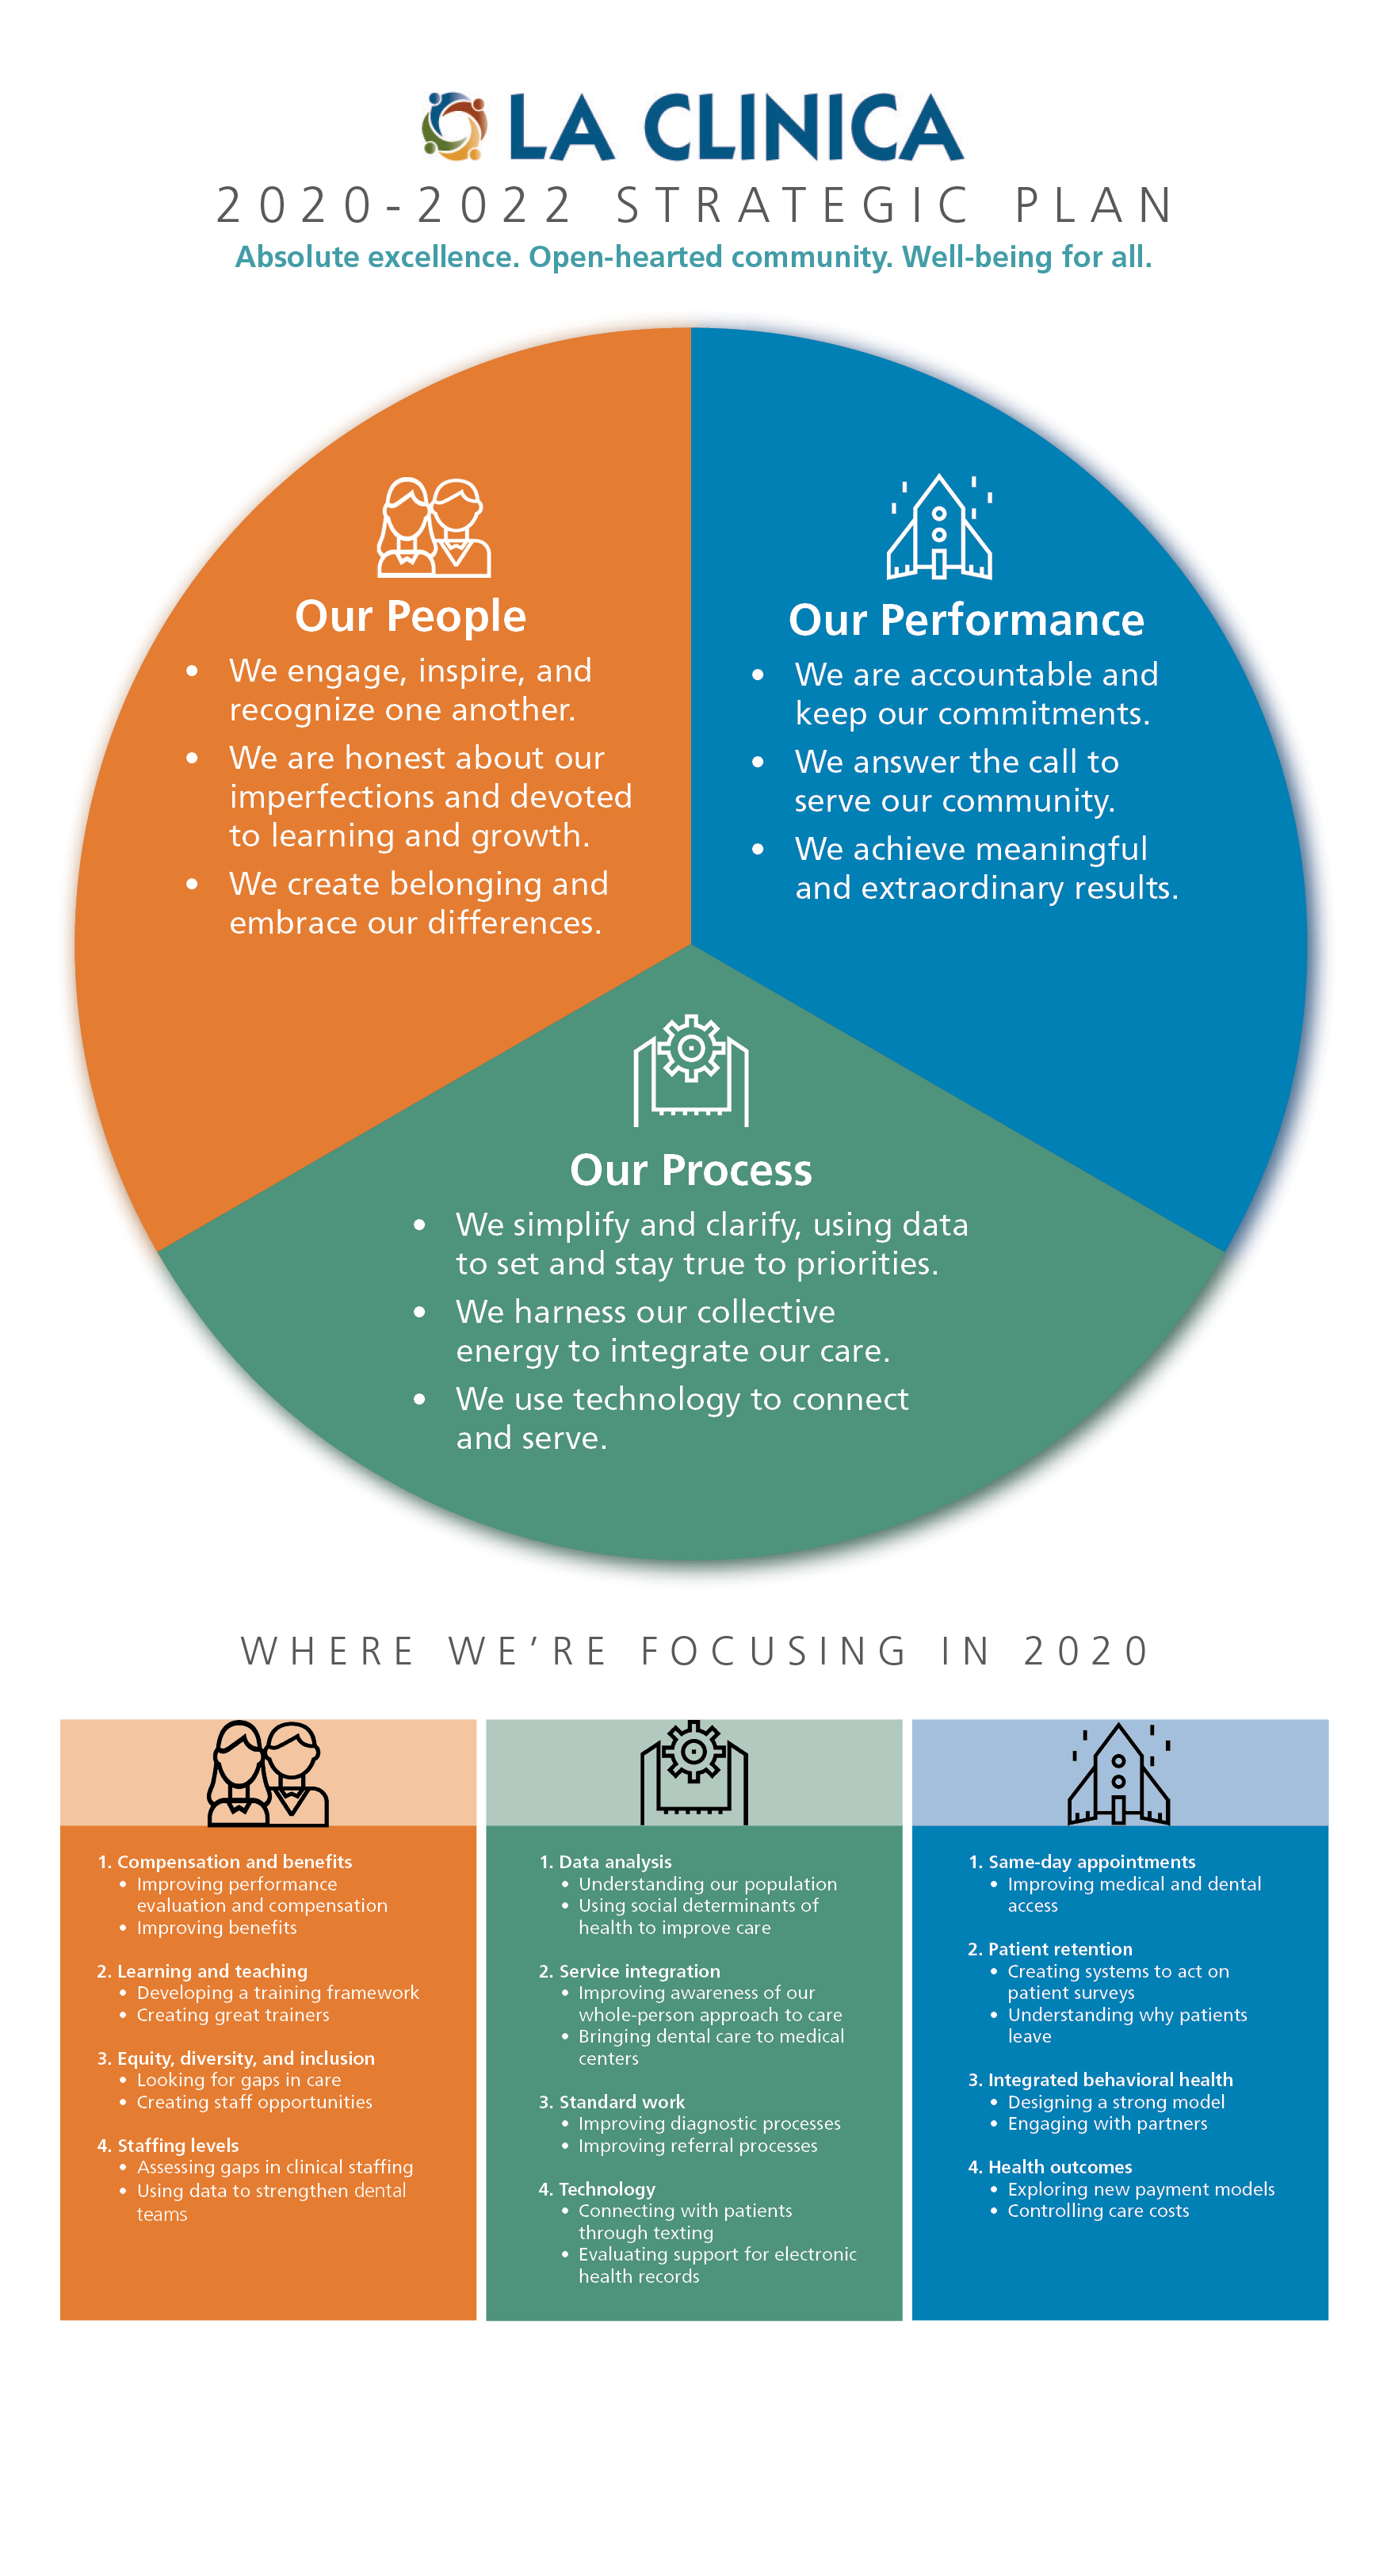 This is a graphic showing La Clinica's 2020-2022 strategies and its 2020 annual plan.